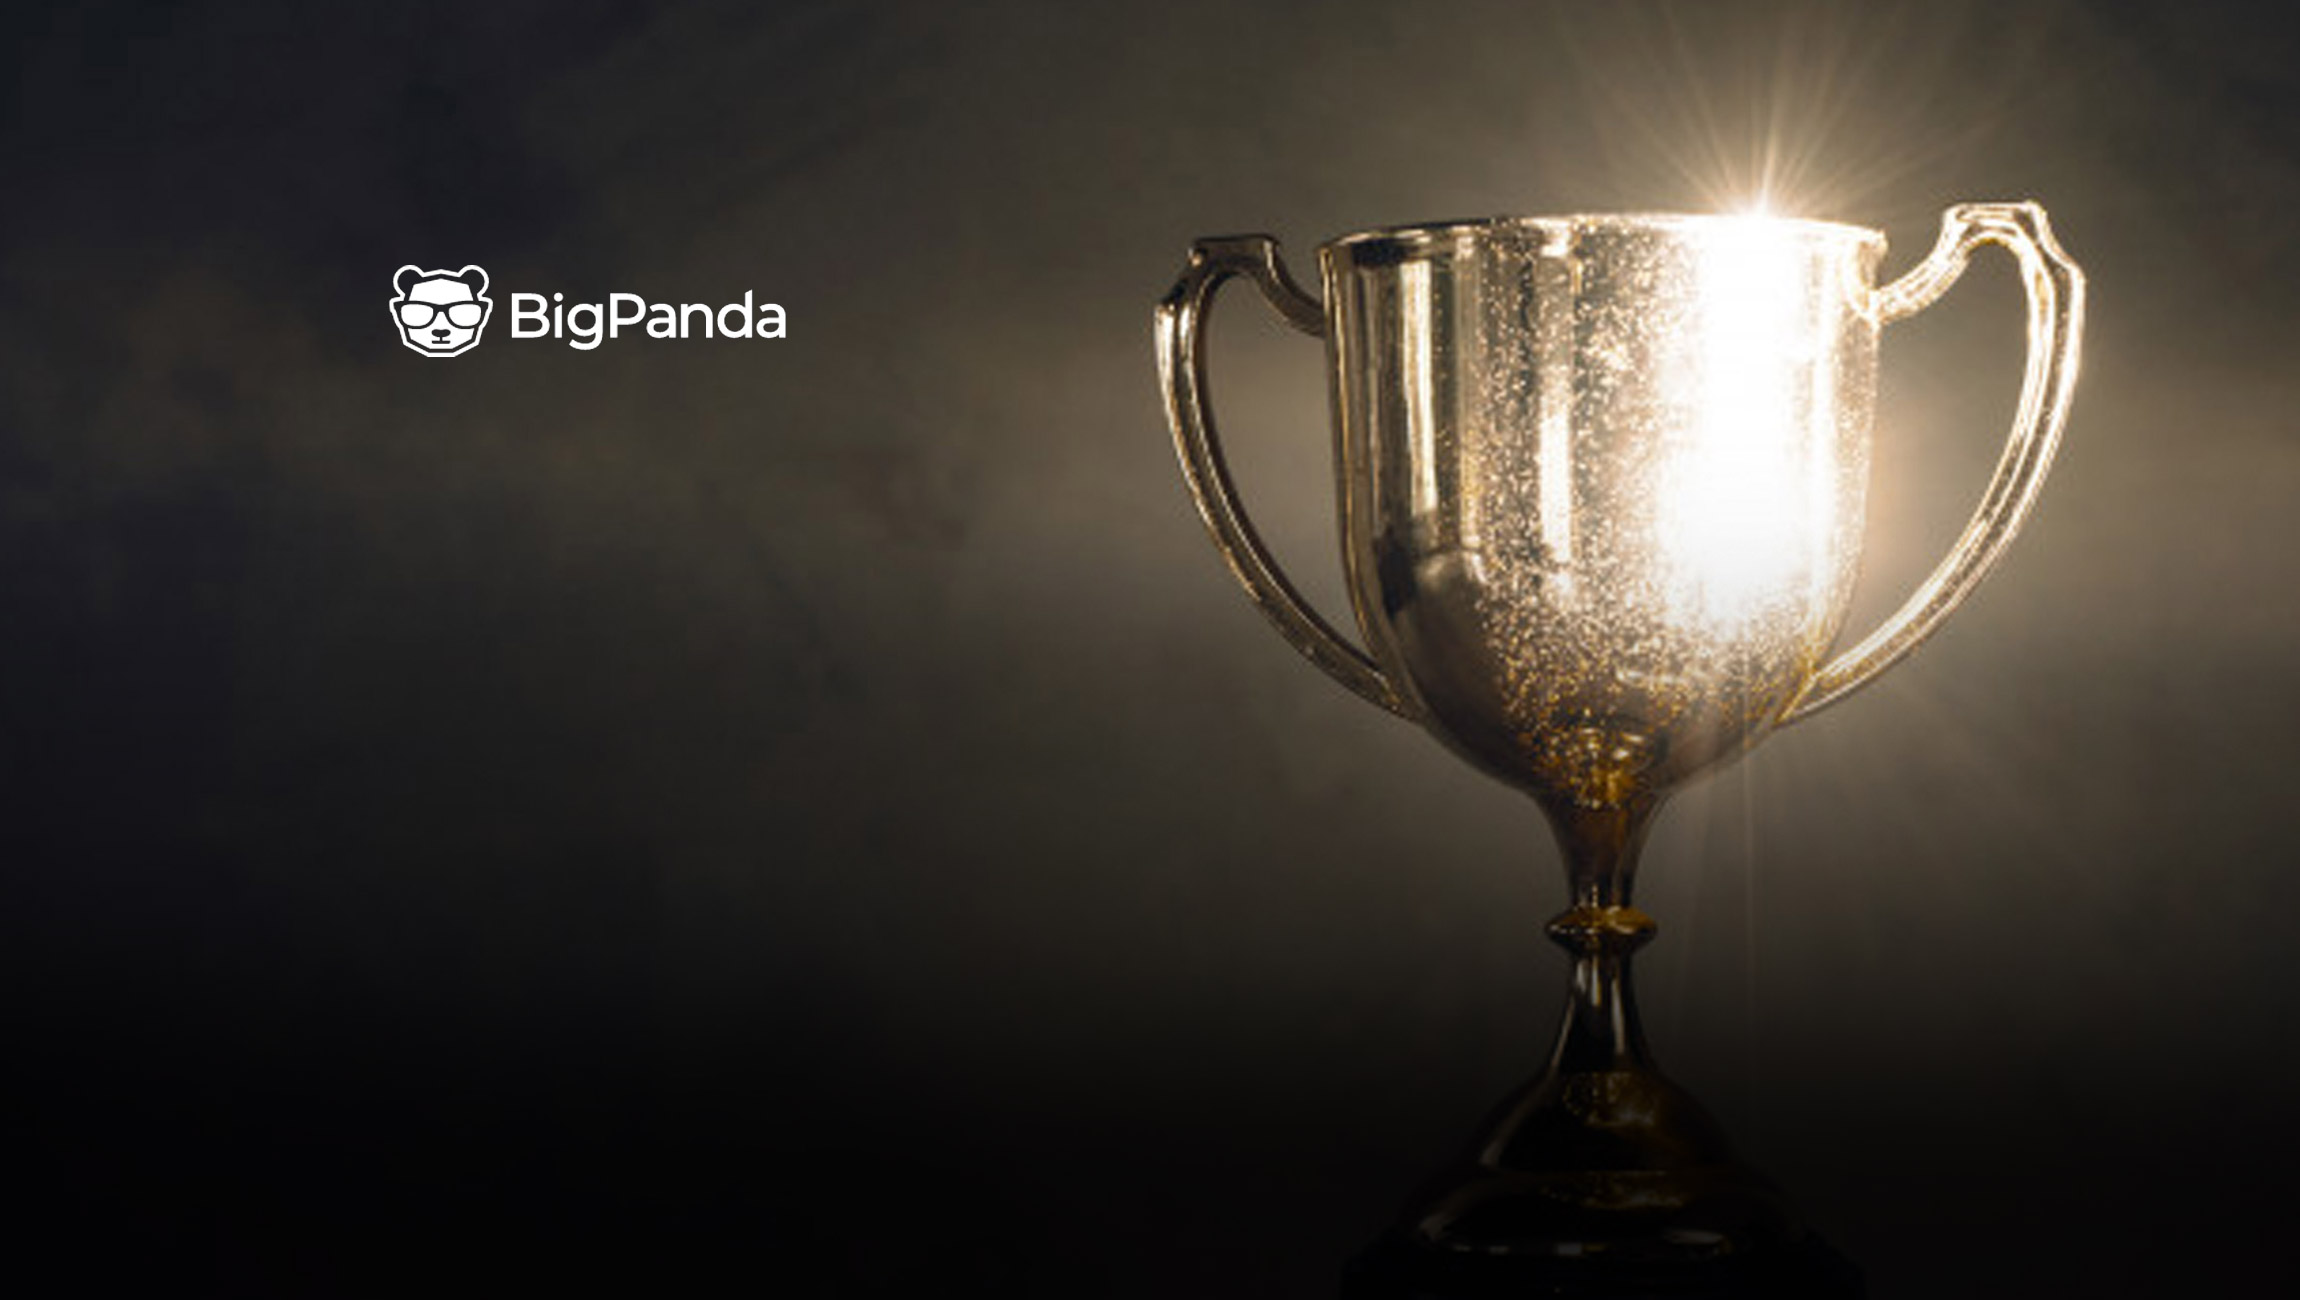 BigPanda Wins Bronze Award in 16th Annual Stevie Awards for Sales and Customer Service